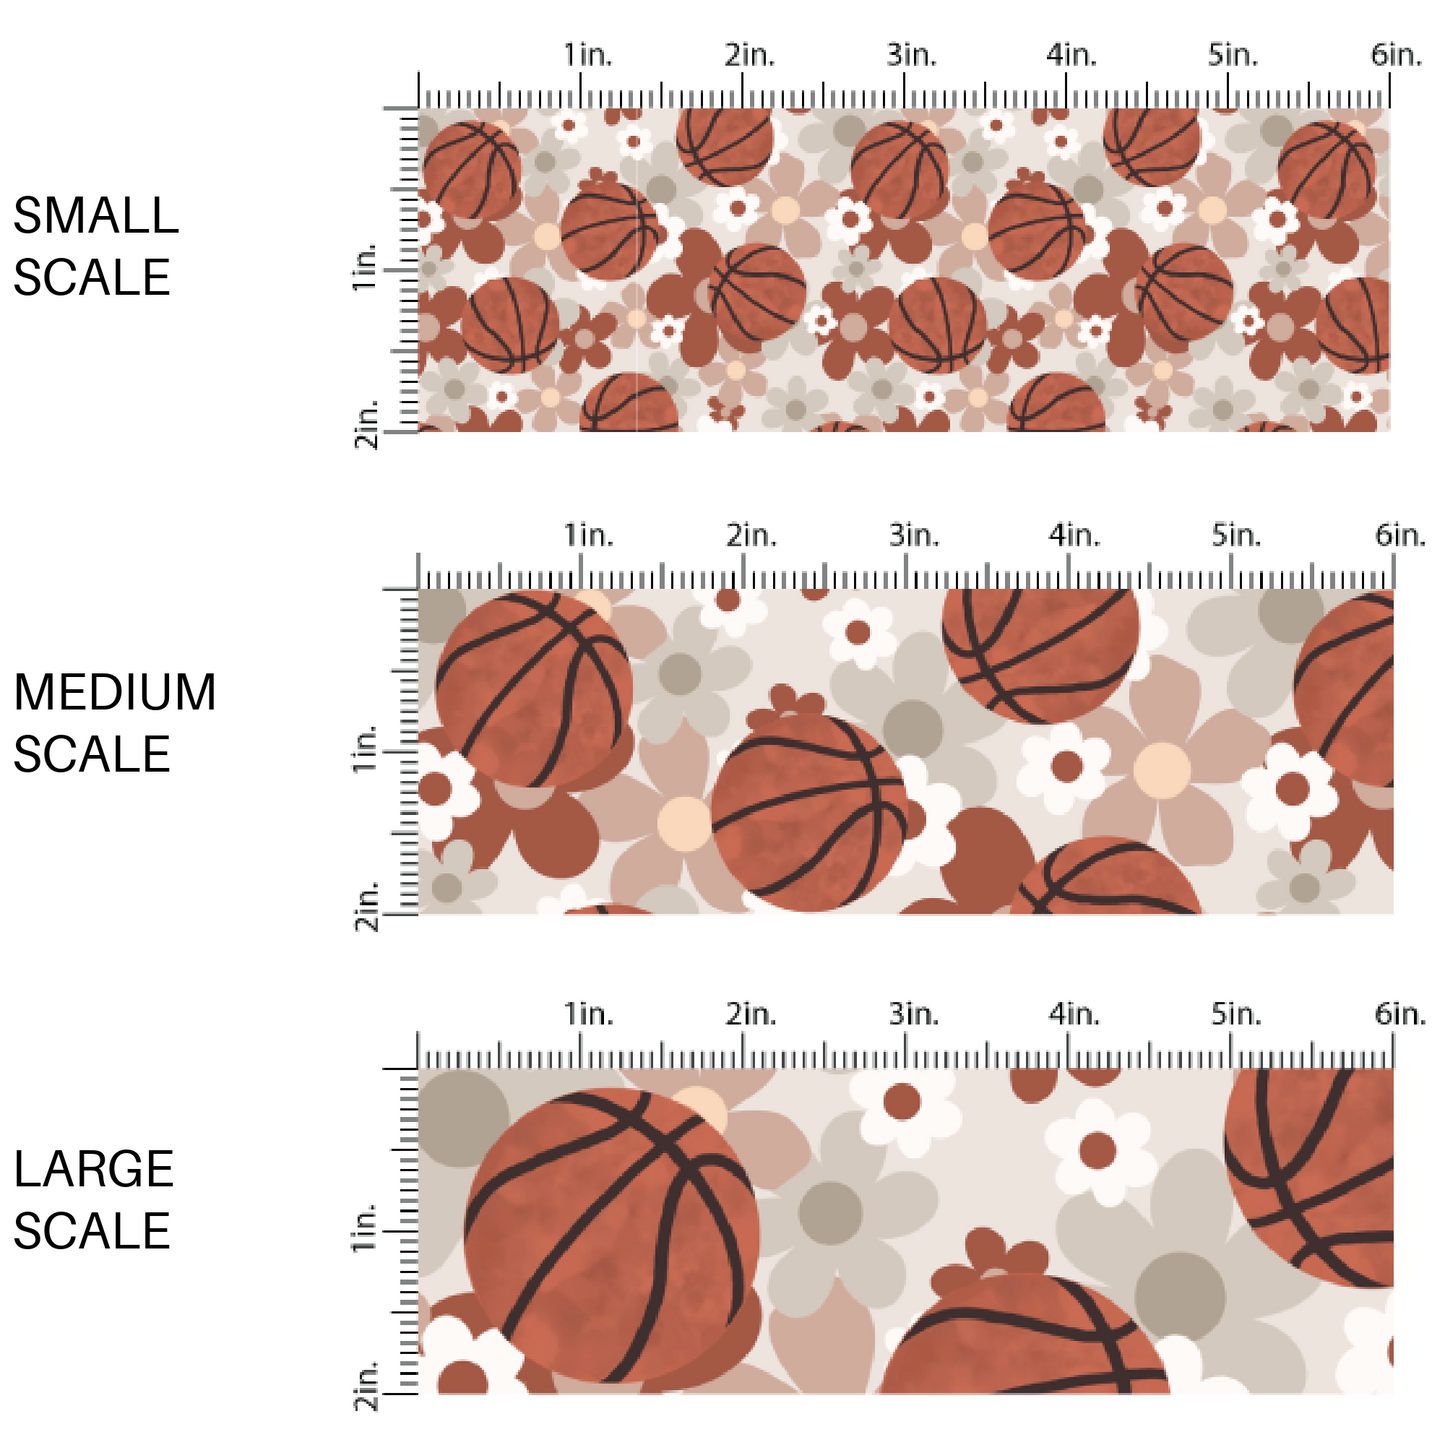 Light gray fabric by the yard scaled image guide with basketballs and gray, red, and white florals.